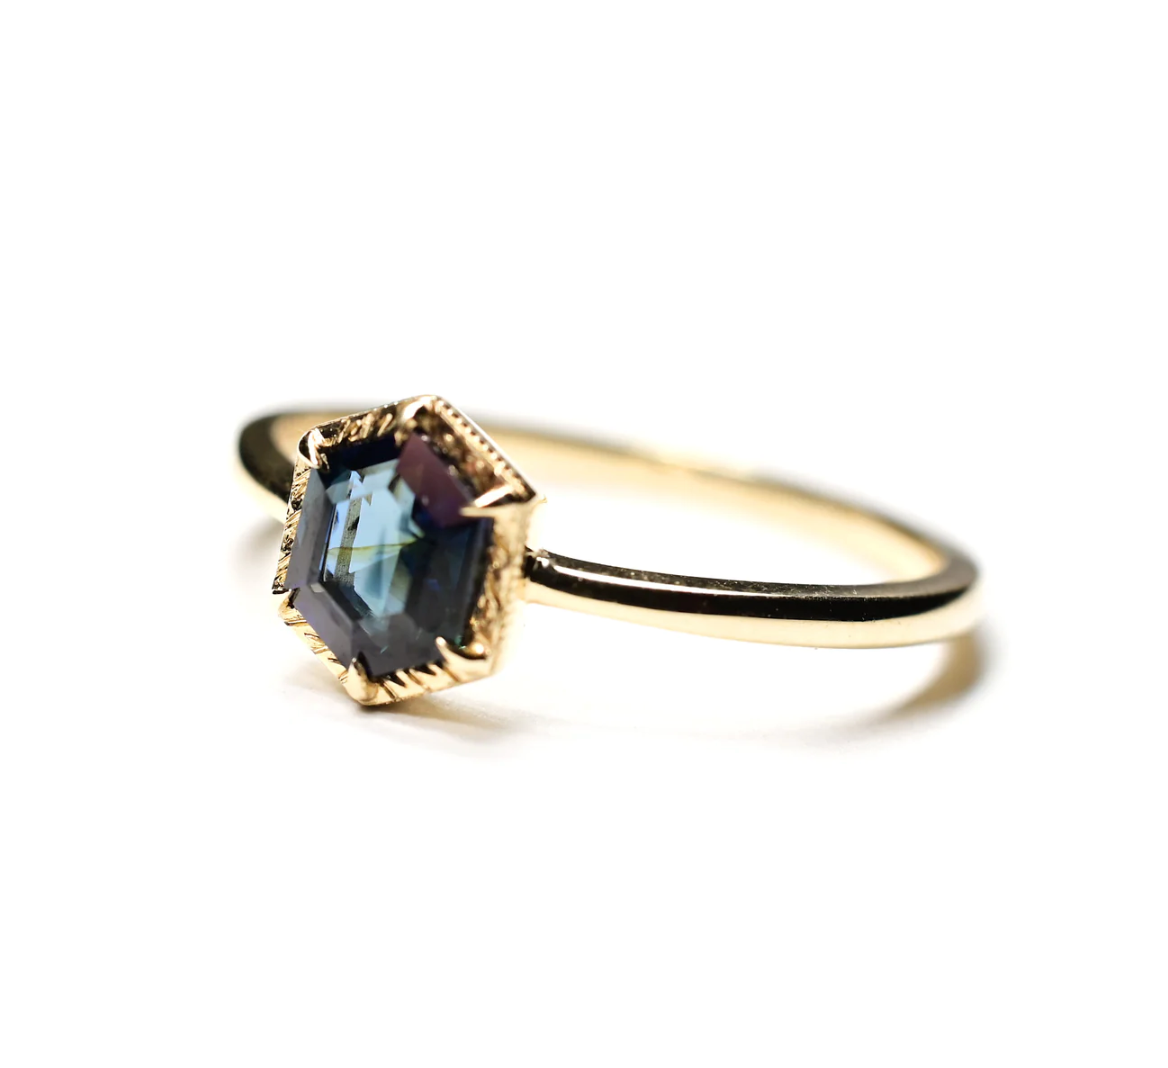 an angled view of the hexagon blue spinel solitaire ring, sitting on a white background